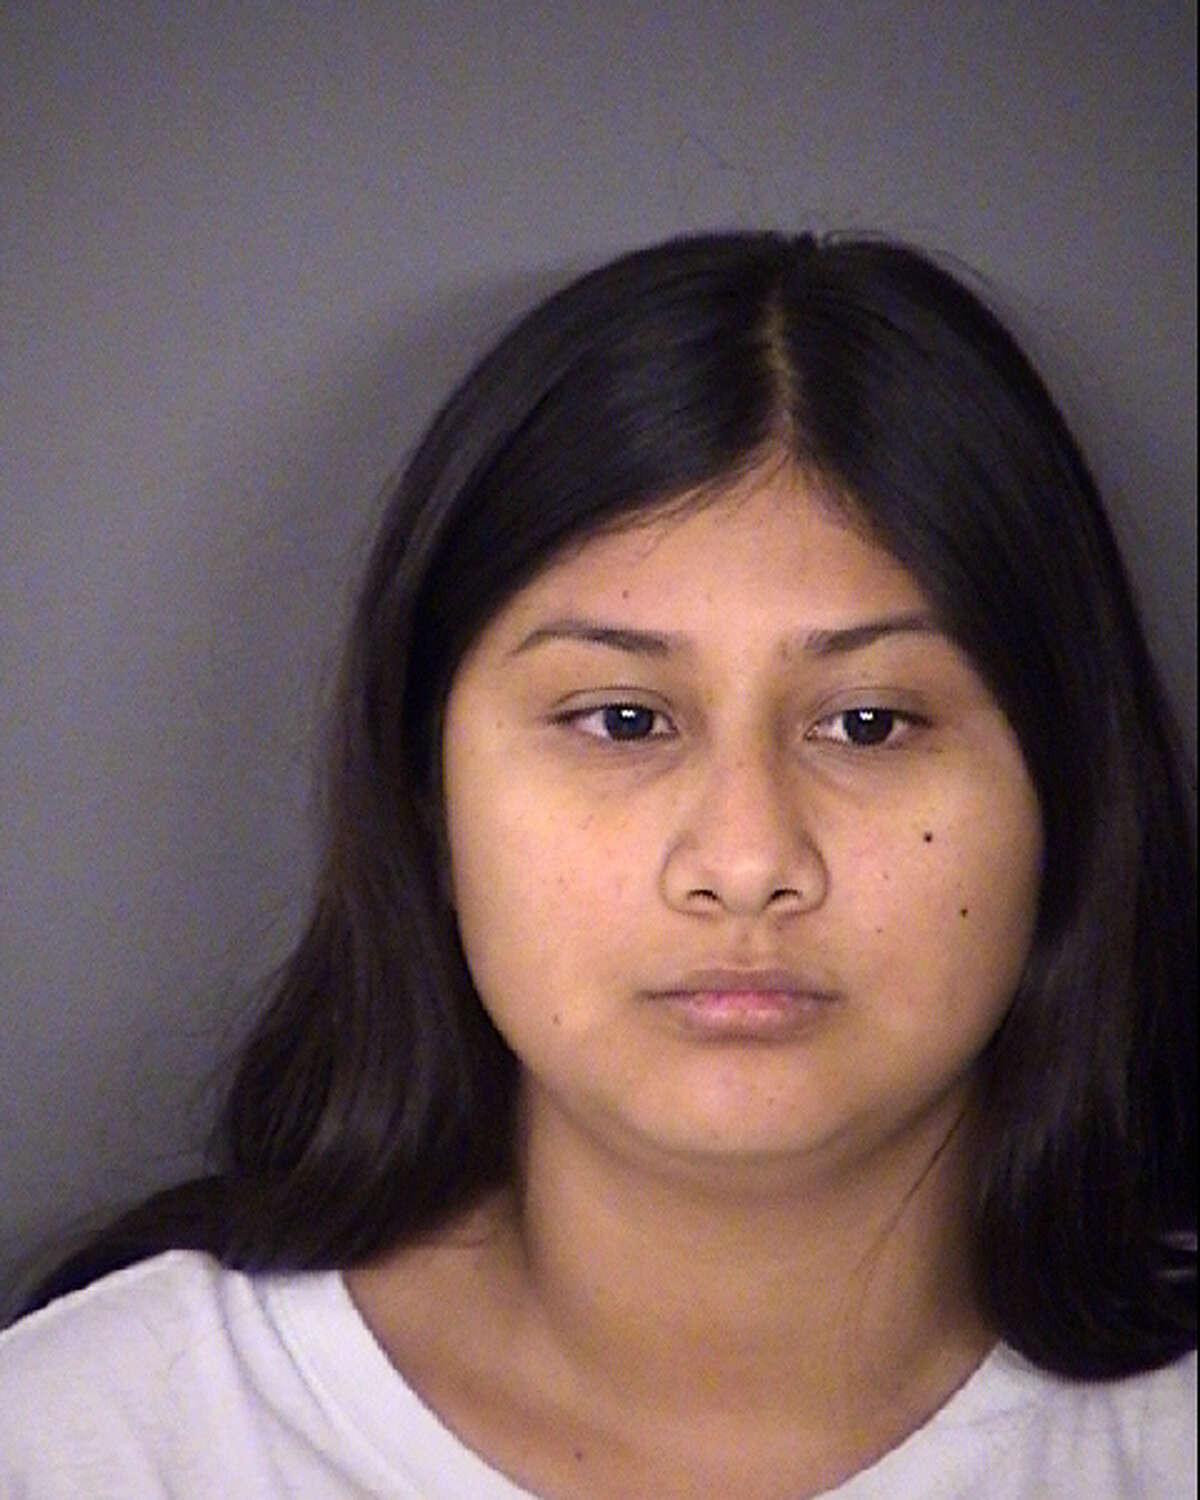 Amanda Tafolla faces a charge of aggravated robbery. She remains in the Bexar County Jail on a $75,000 warrant.